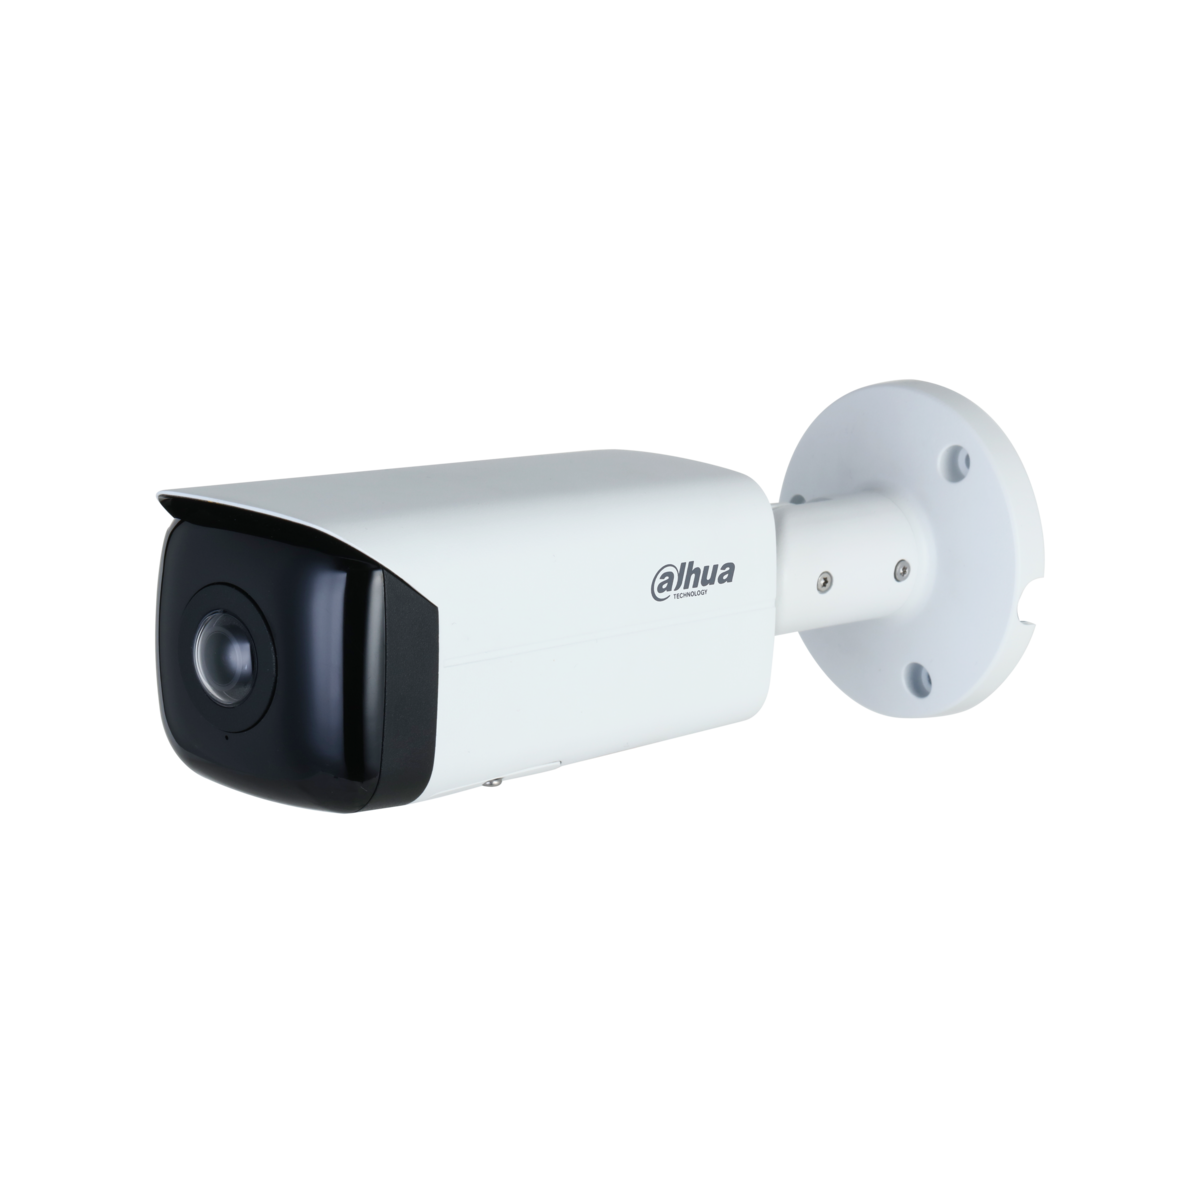 WIZSENSE SERIES IP CAMERA WHITE 180° PANORAMIC 4MP H.264/4+/5/5+ BULLET 120 WDR METAL 2.1MMFIXED LENS STARLIGHT IR 20M POE IP67 BUILT IN MIC AUDIO IN AUDIO OUT 1 x ALARM IN 1 x ALARM OUT SUPPORT UP TO 256GB SD 12VDC